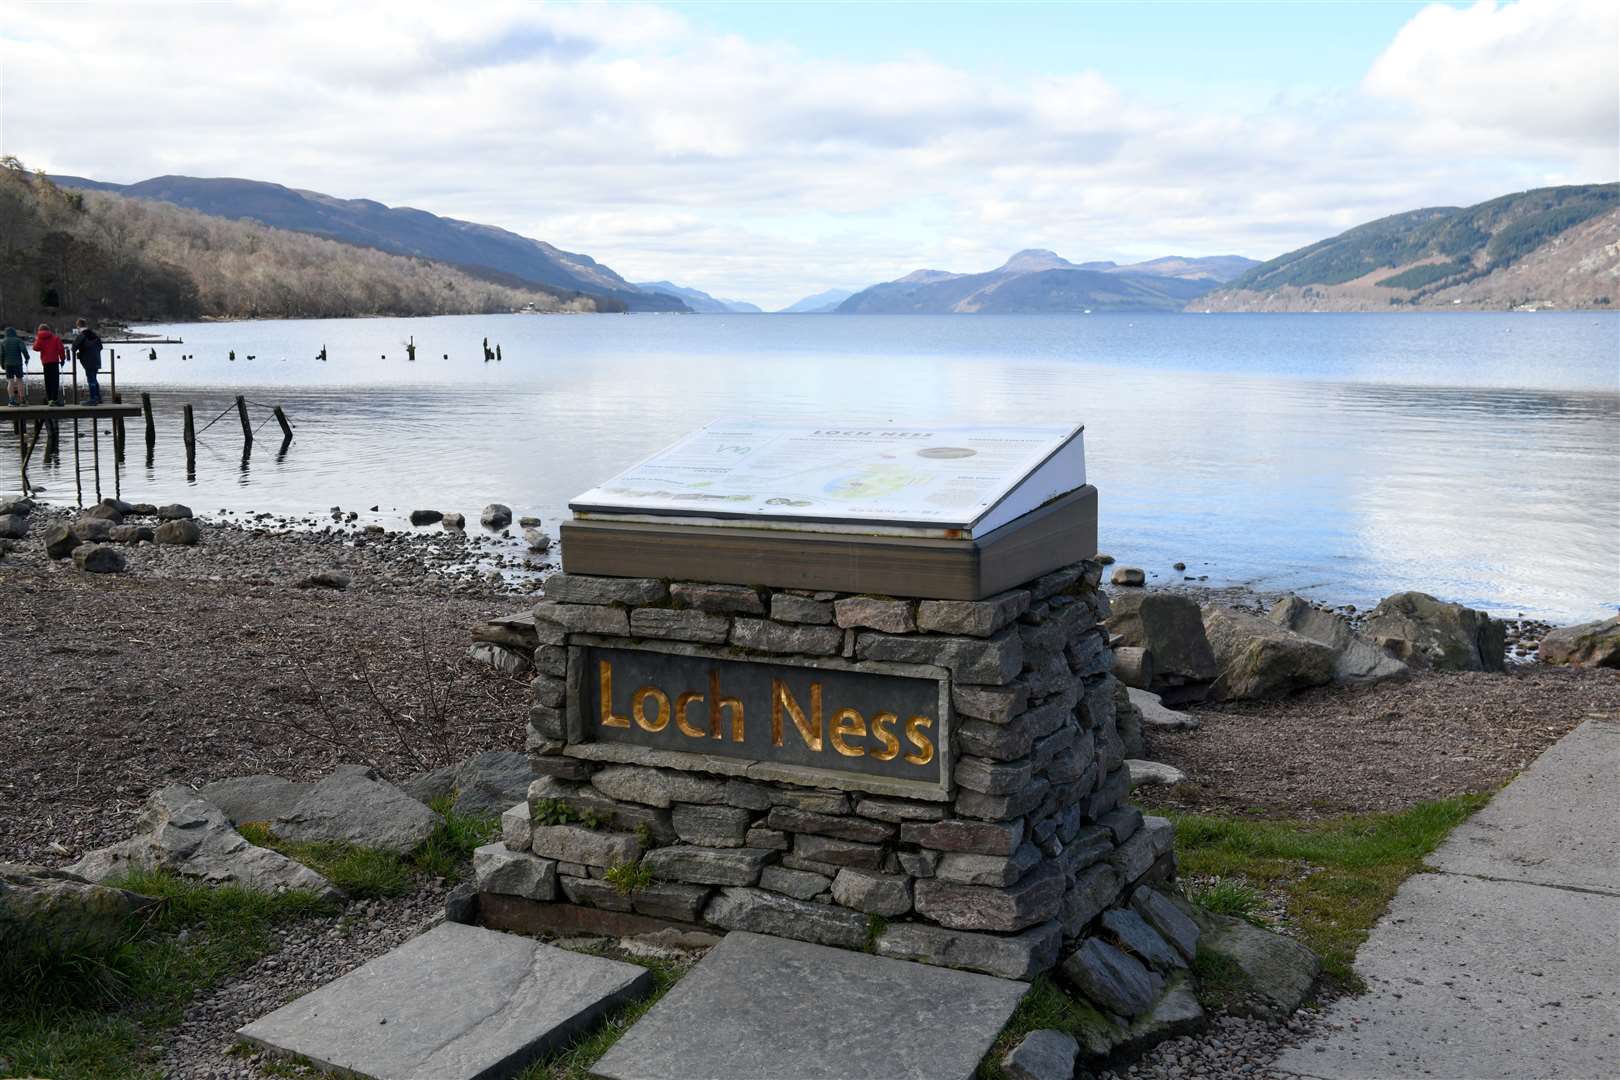 The lure of seeing something unexplained on Loch Ness continues to attract visitors 90 years after the first reported sighting of a "monster".